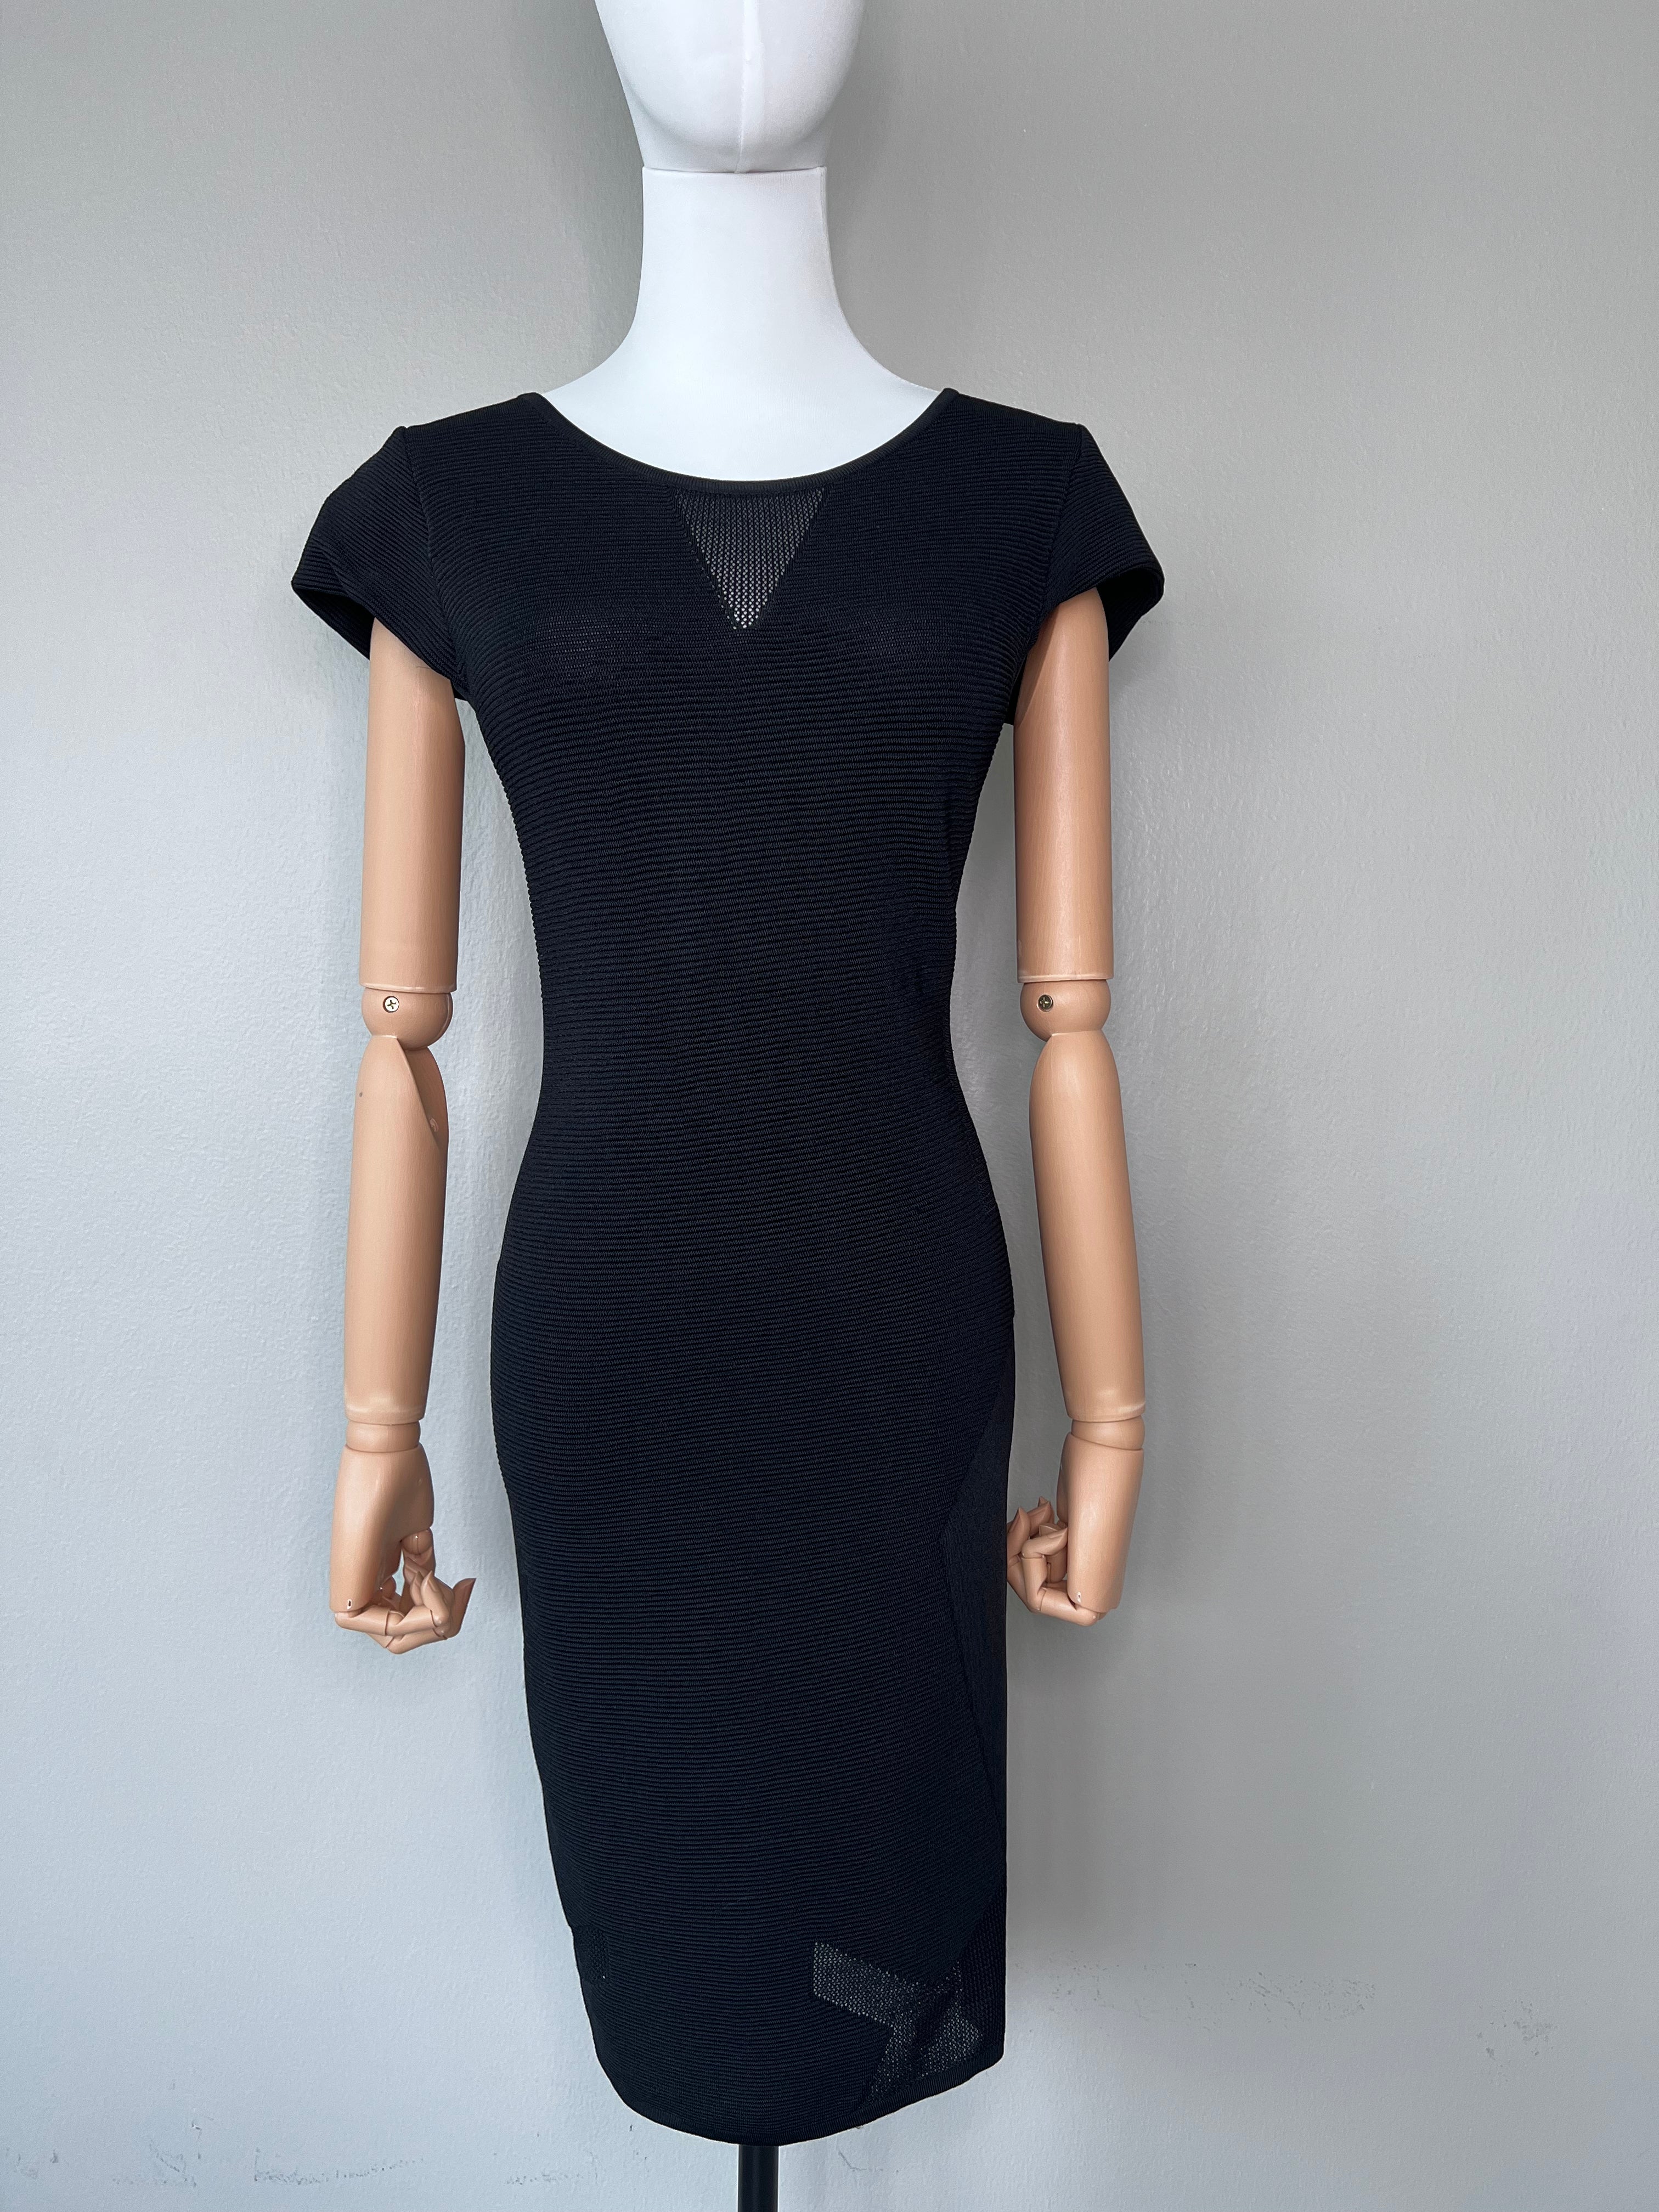 Tight black knitted dress with crew neck collar, see-through material. - MAJE